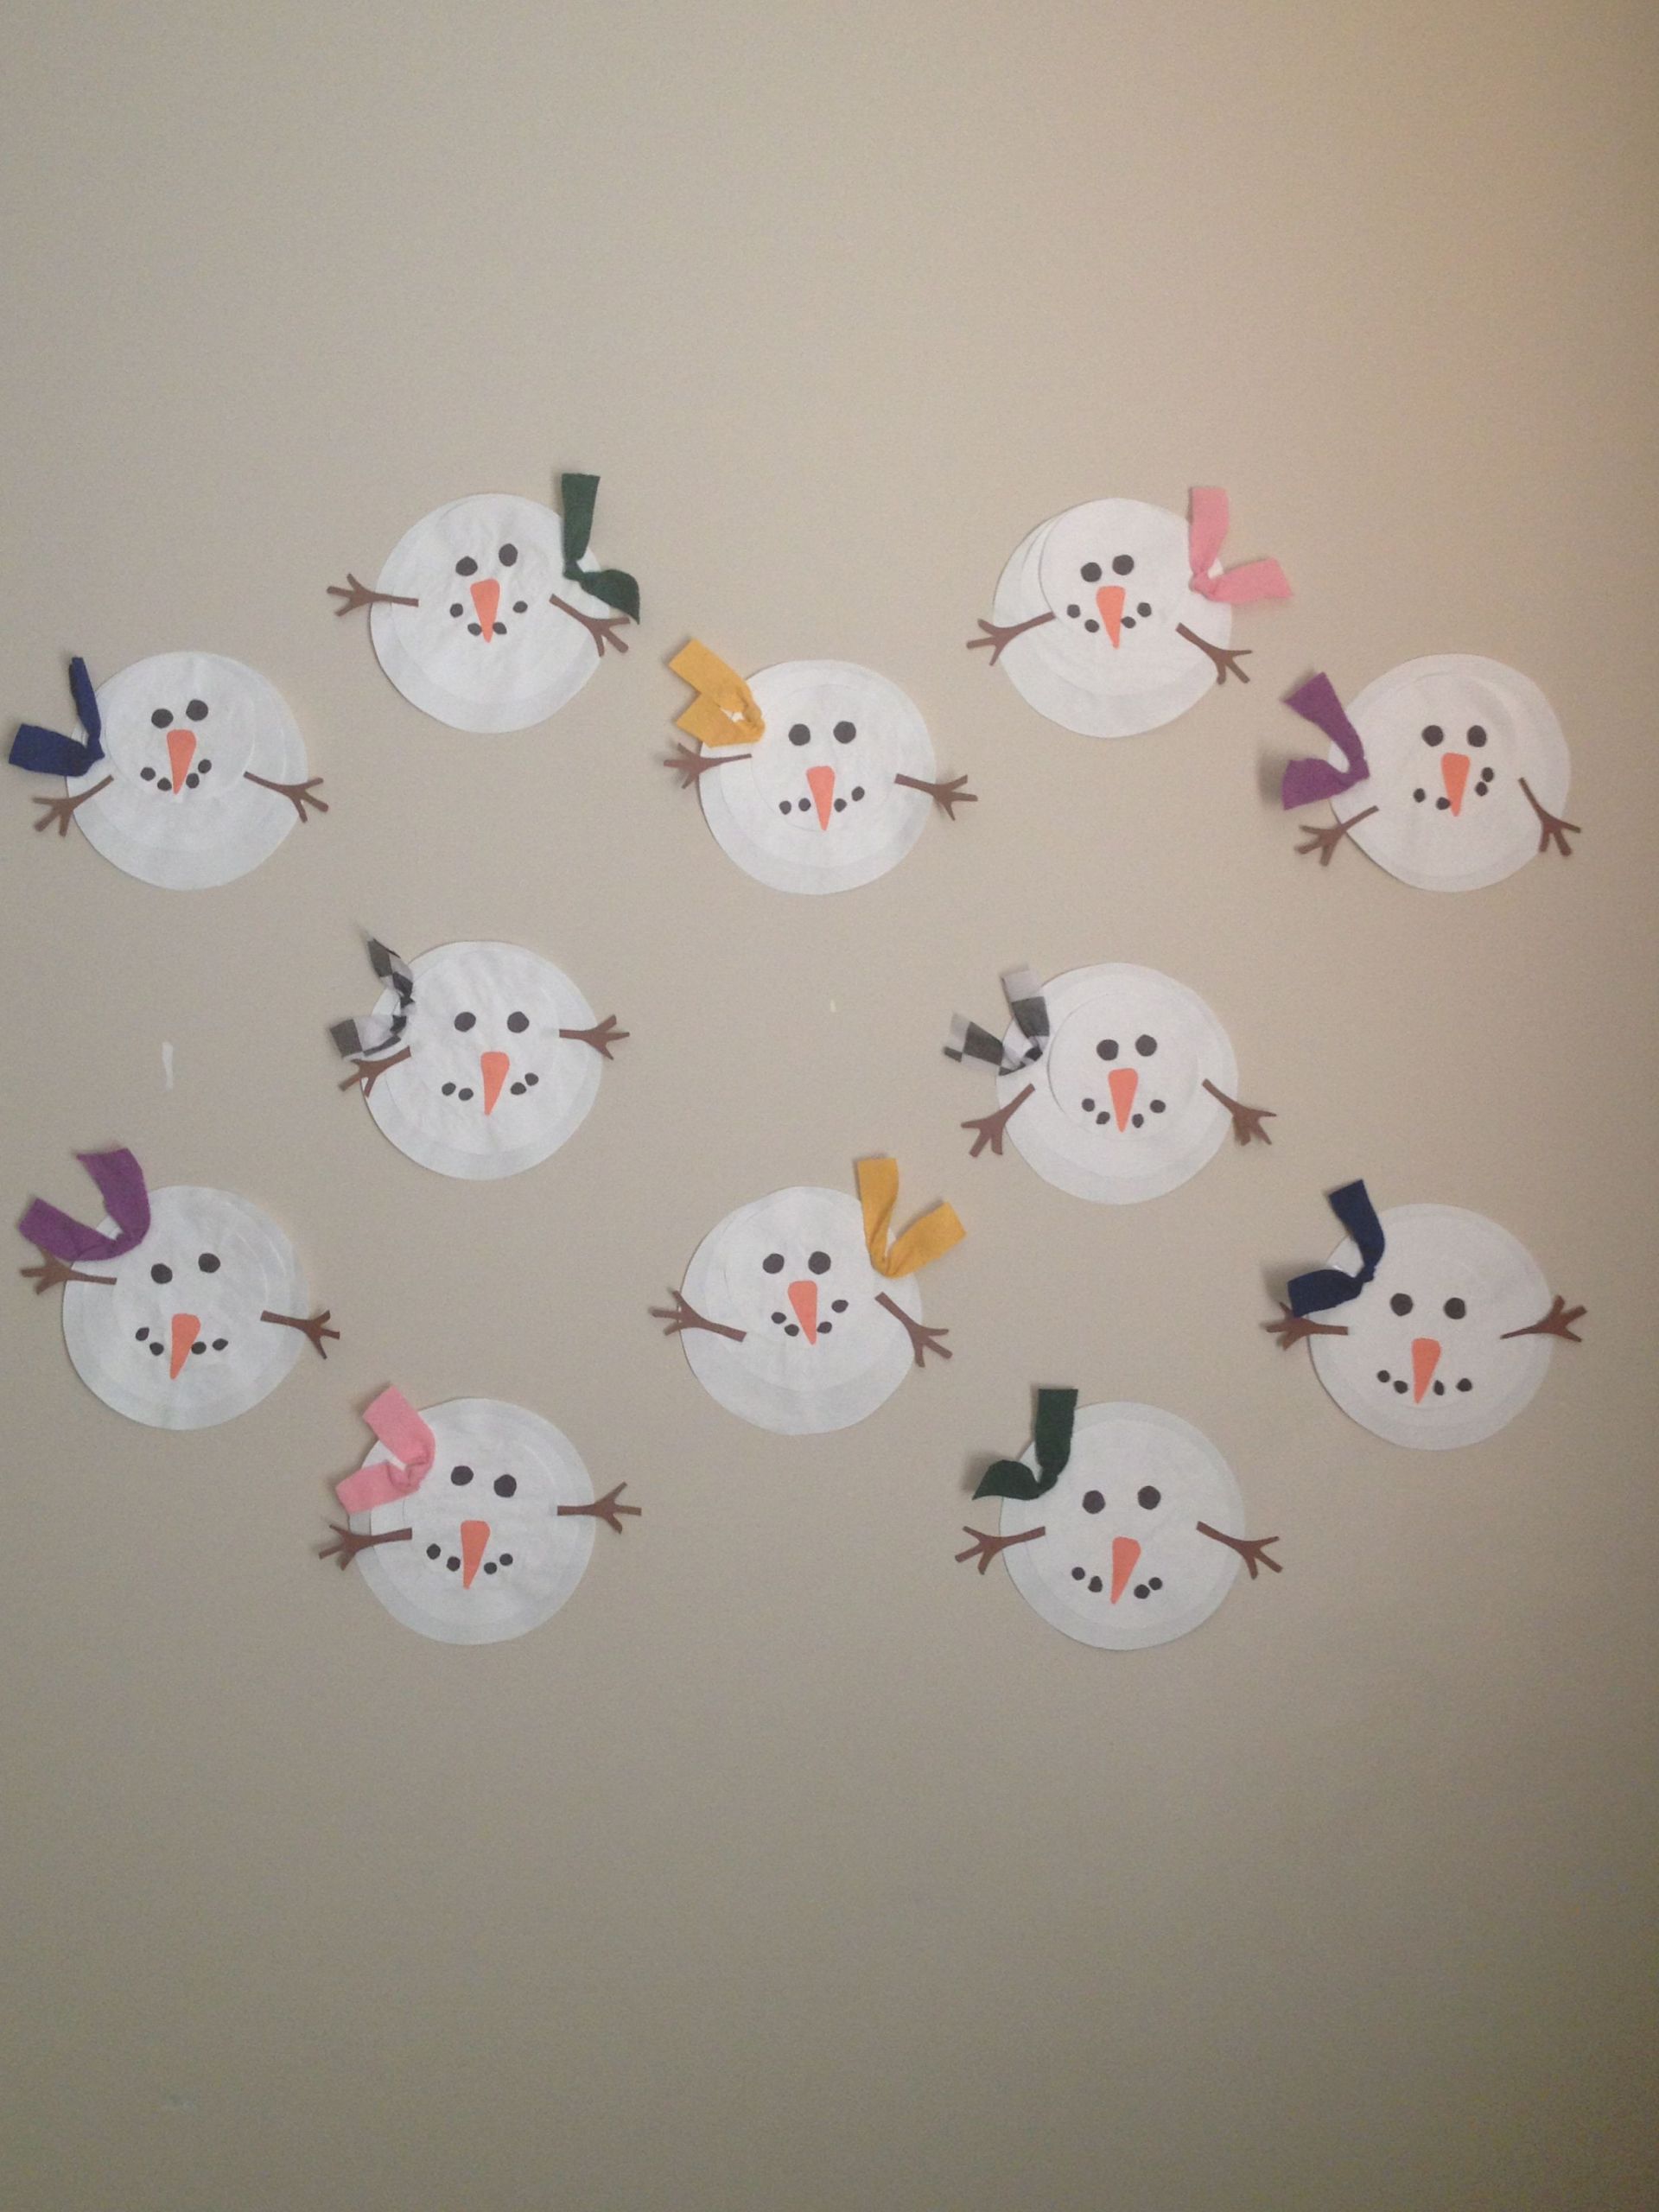 Toddler Craft Ideas 2 Year Old
 Snowman craft Did this craft with 2 year olds